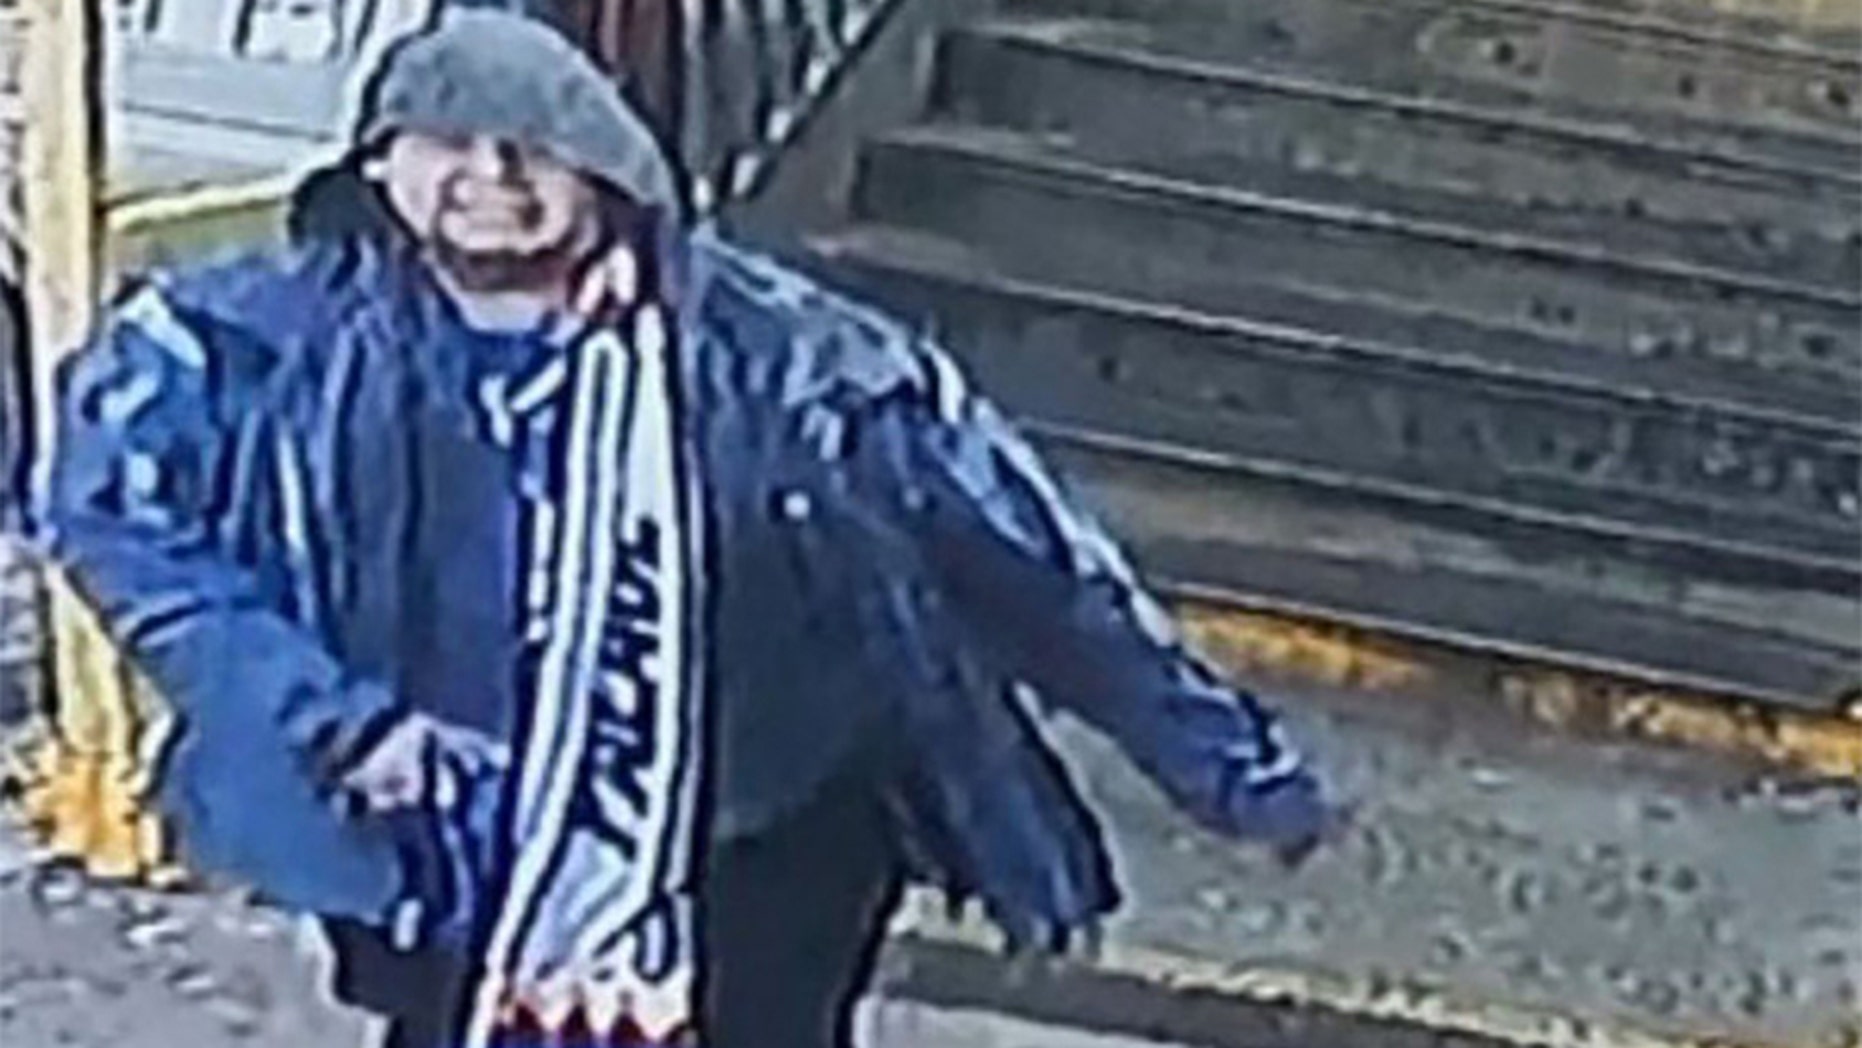   A person of interest sought by police for questioning the killing of another man Sunday afternoon on a subway platform in New York City. 